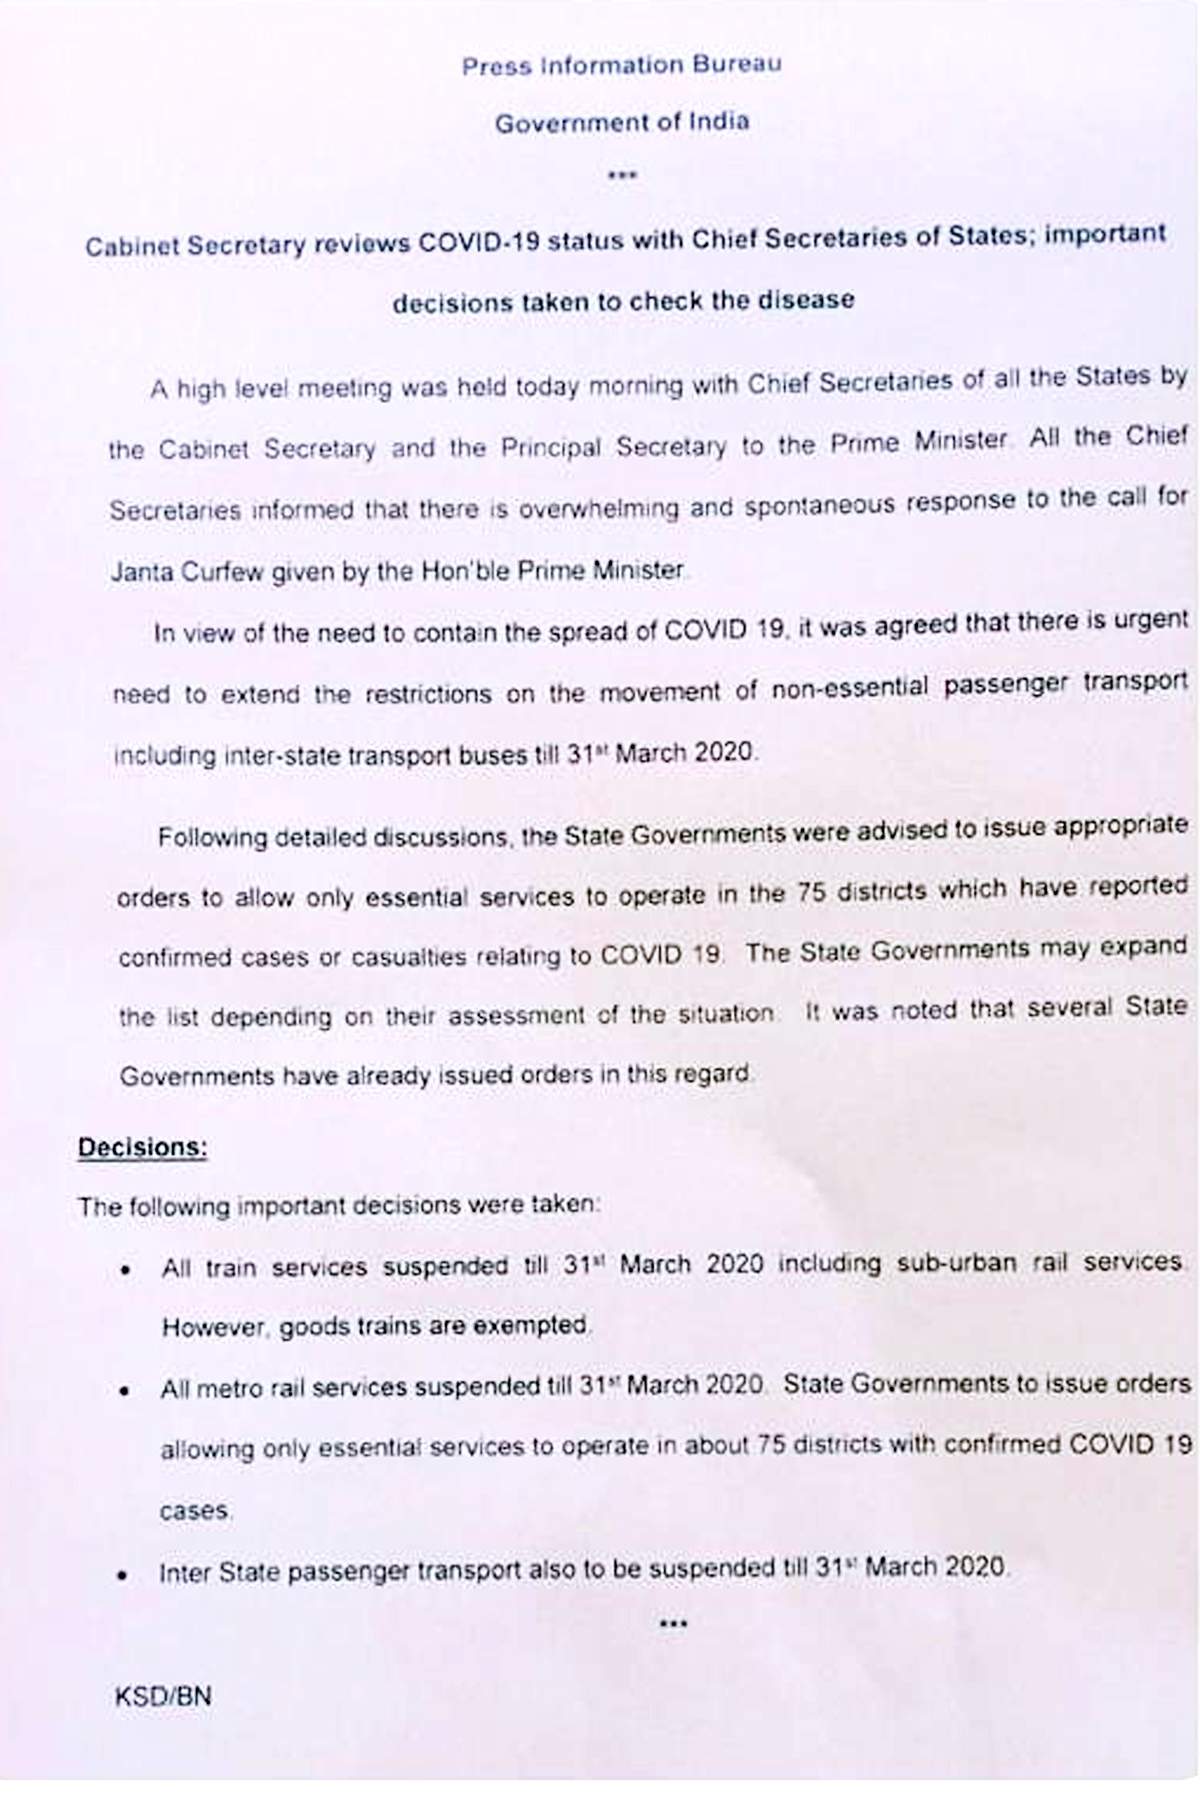 COVID-19 ::  Orders/Directives from Govt of Manipur - Prevention against Corona Virus :: March 22 2020